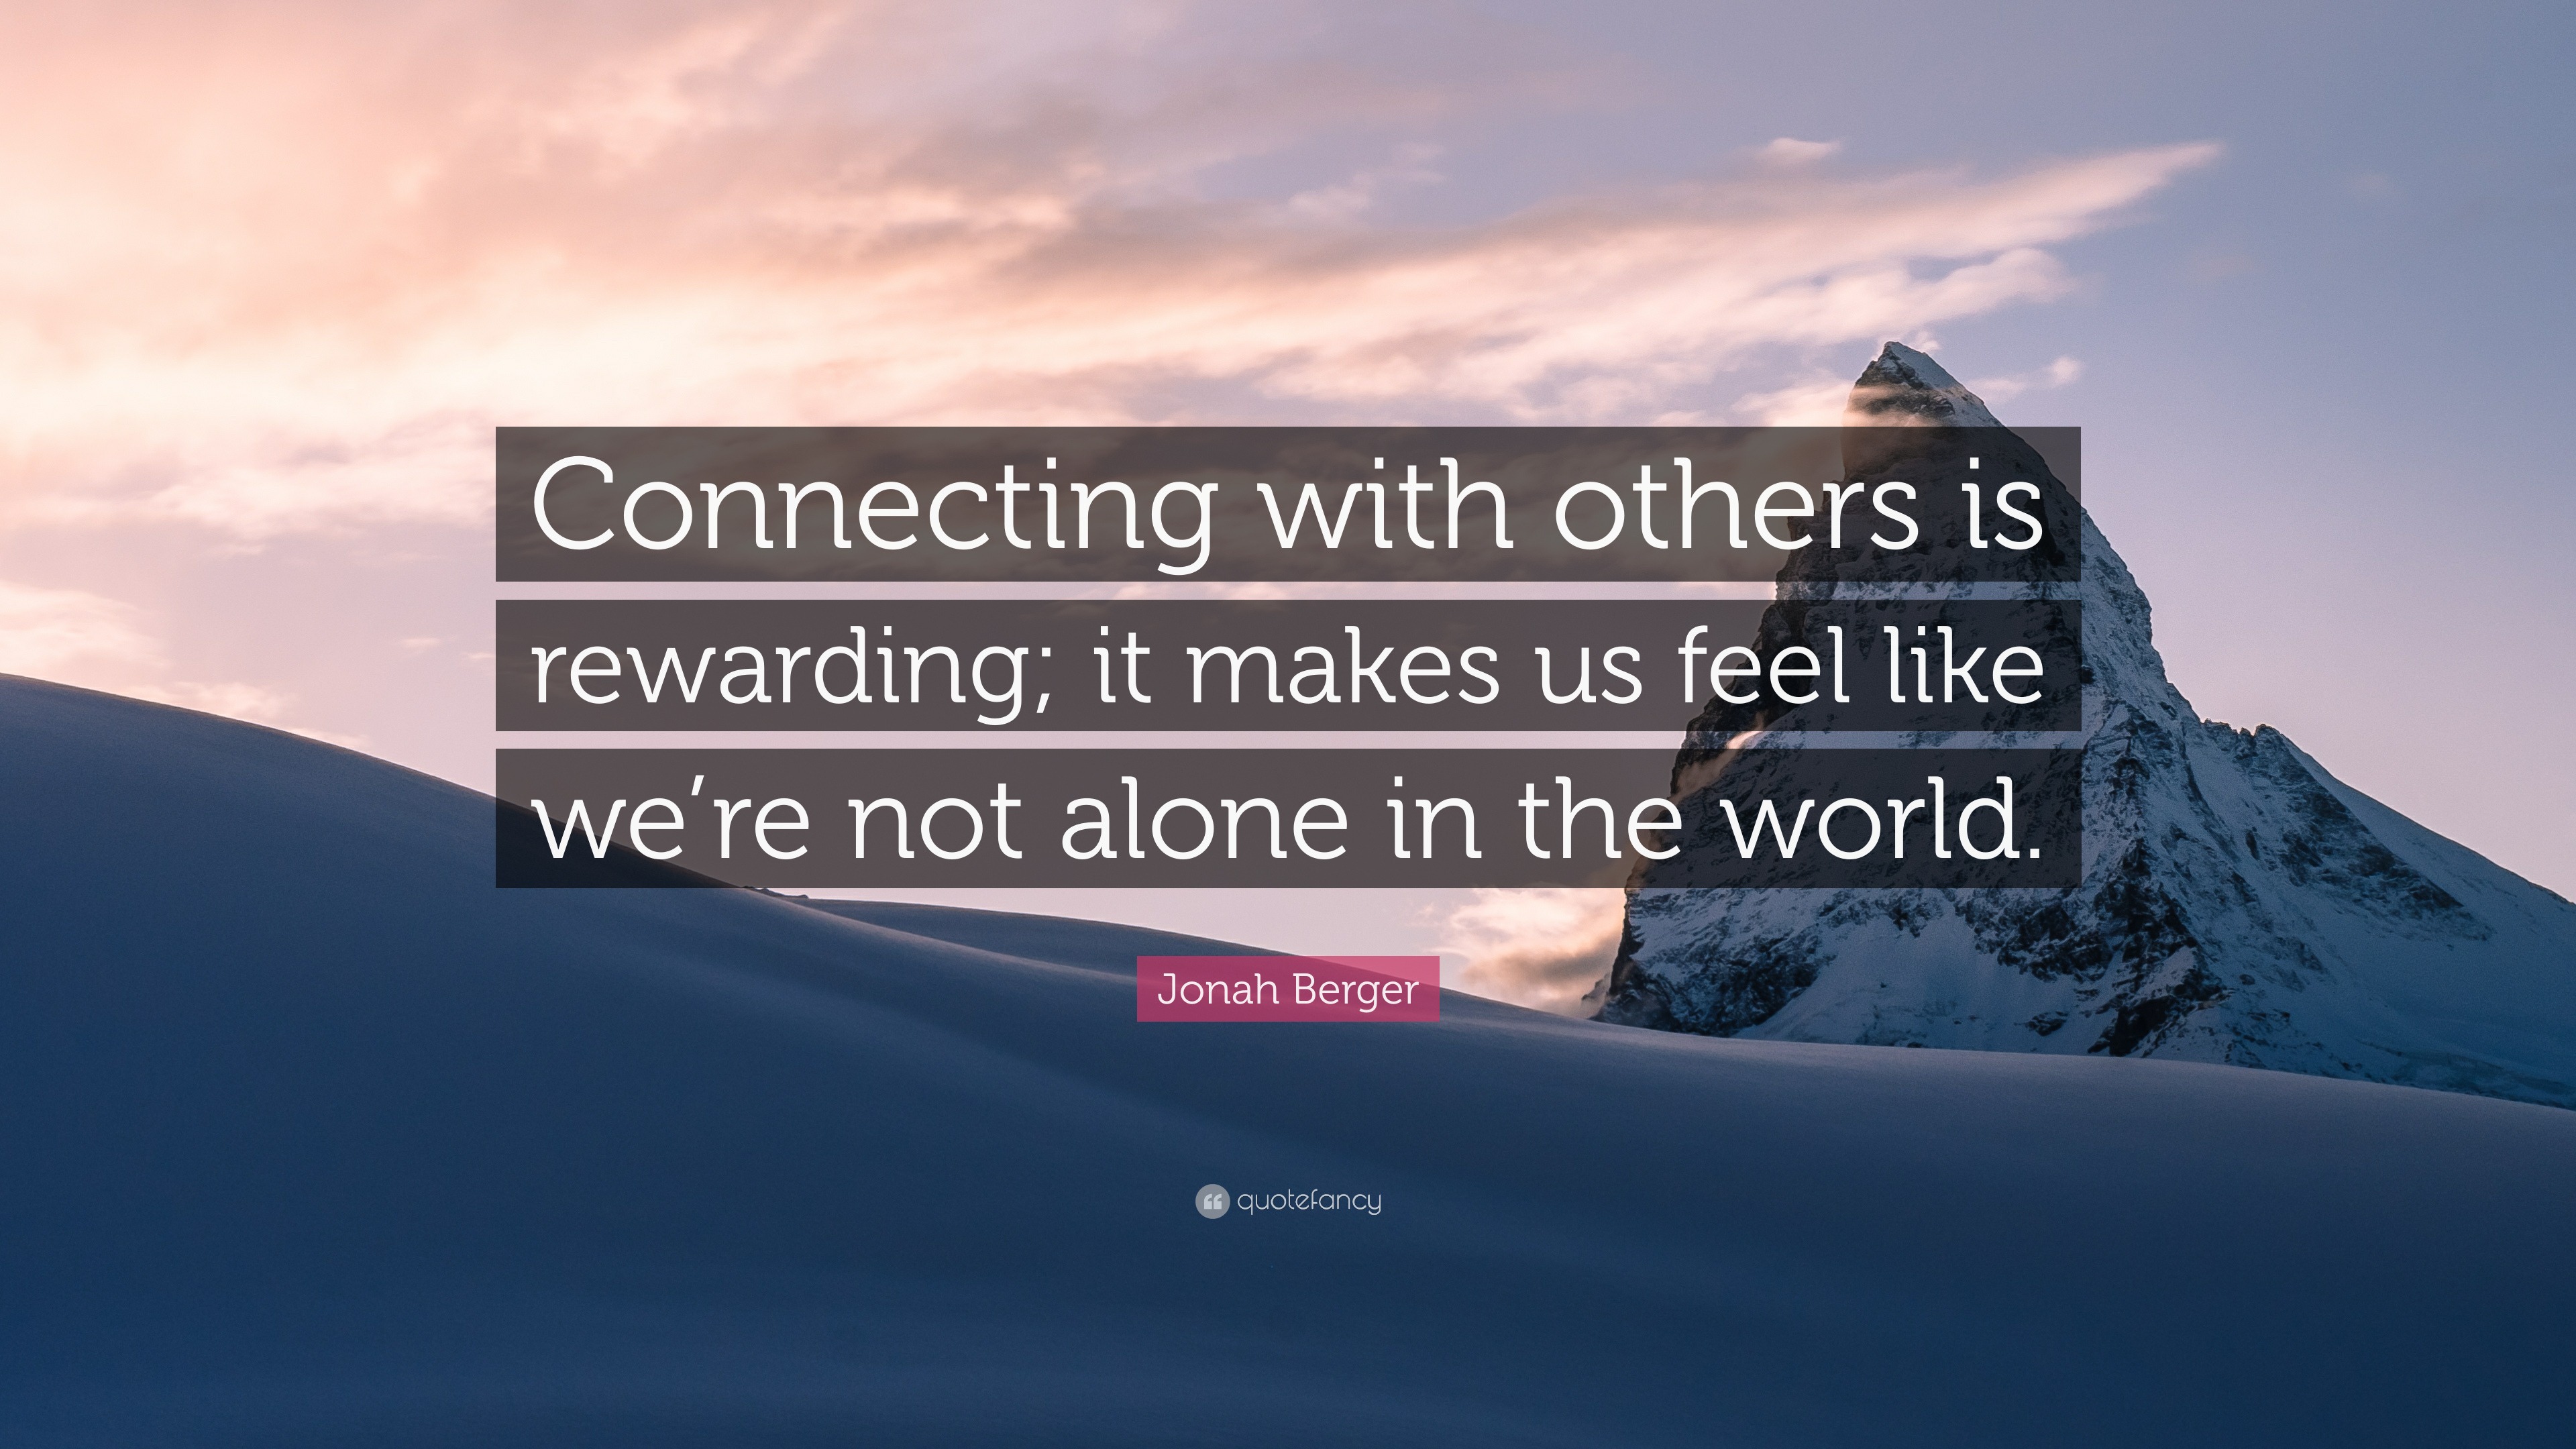 Jonah Berger Quote “Connecting with others is rewarding